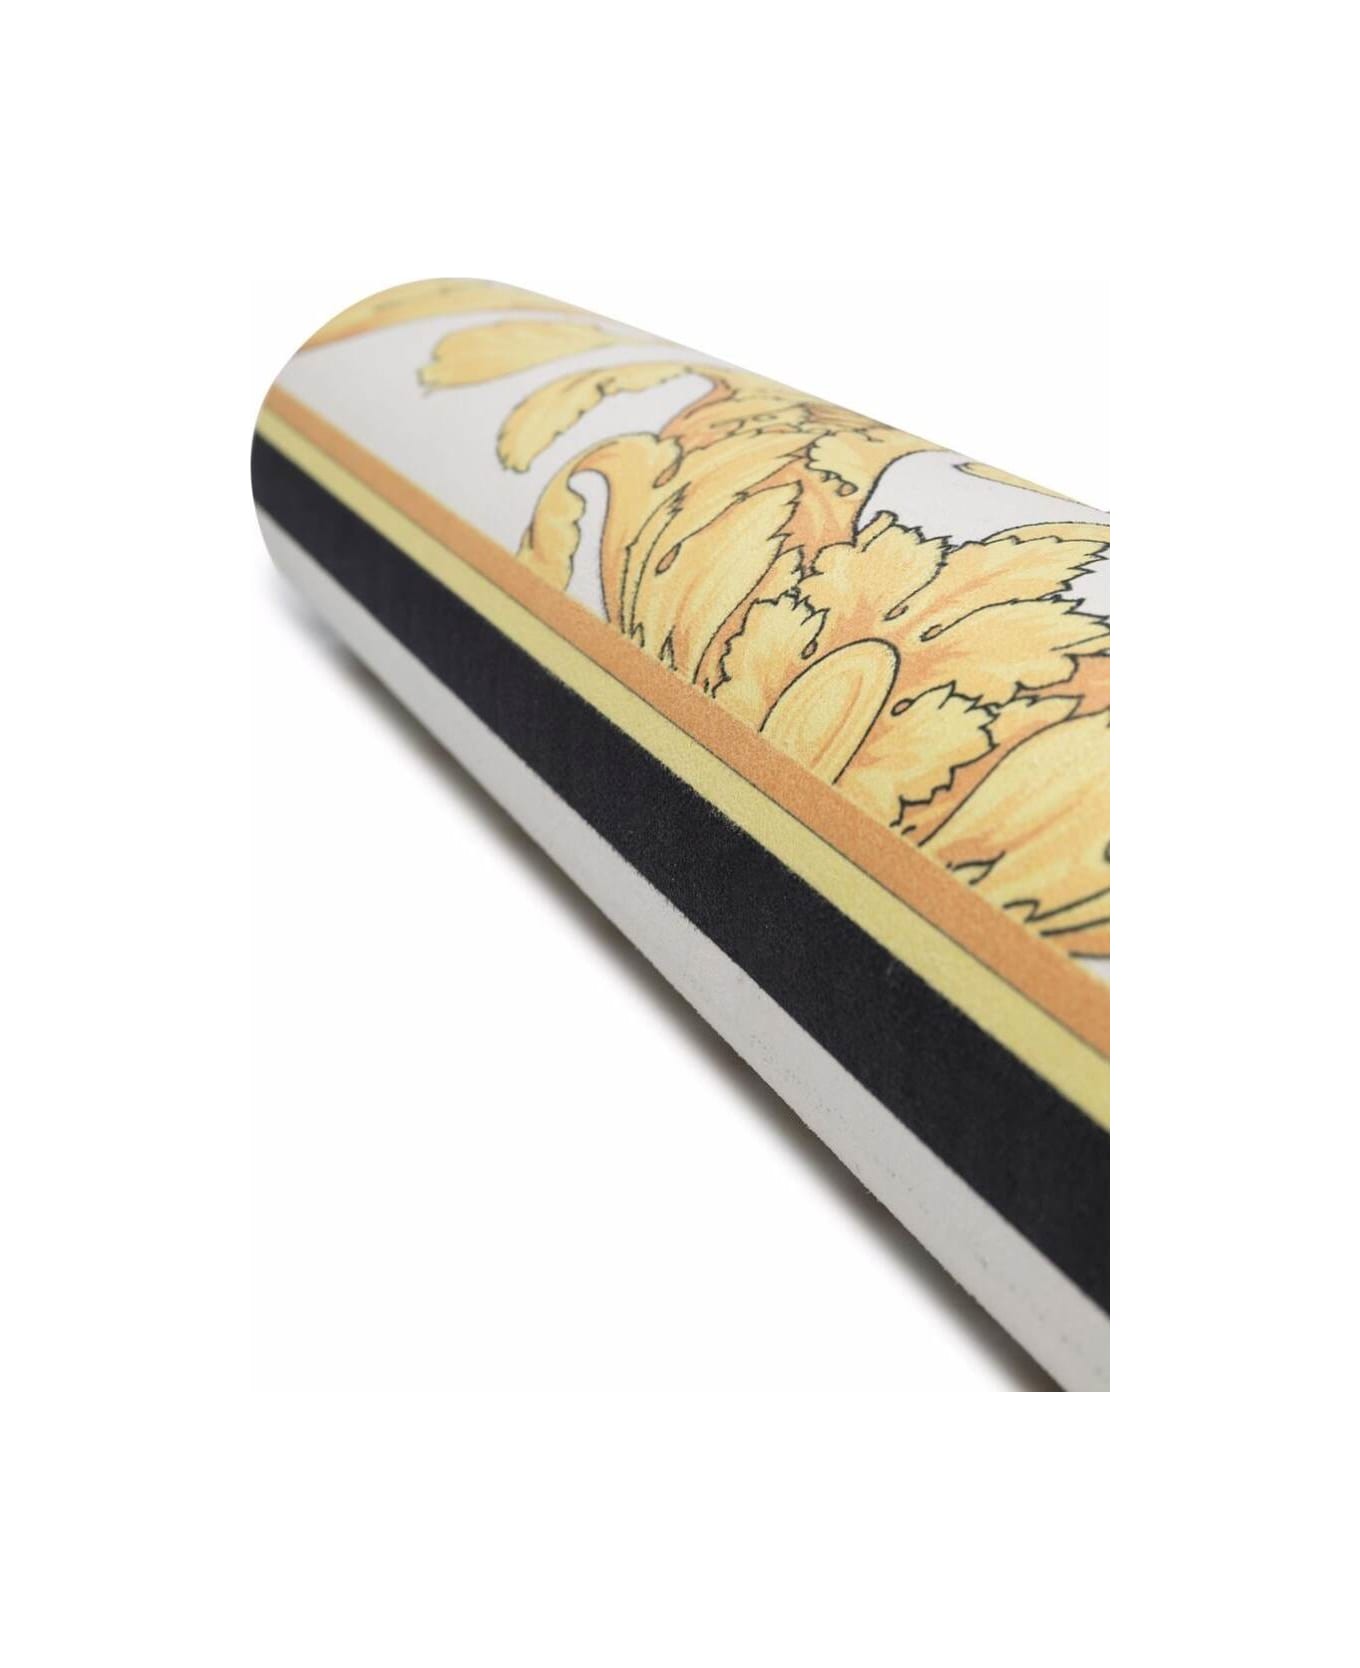 Versace Black / White / Gold Rubber Yoga Mat With I Love Baroque Decoration - Yellow